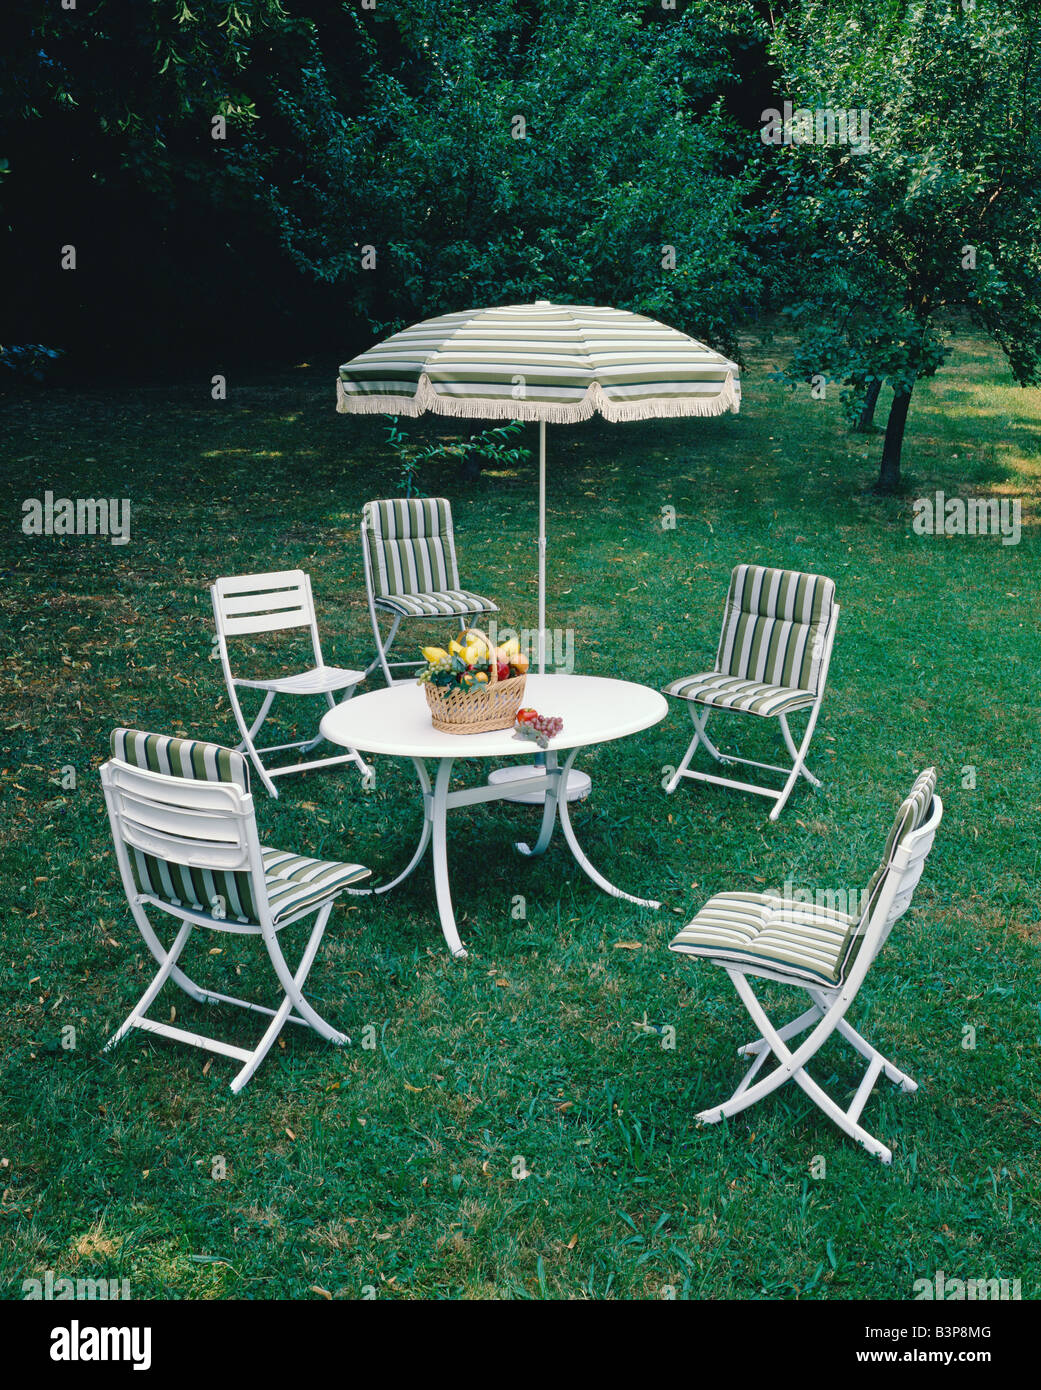 Contemporary Garden Furniture Chairs And Parasol Decorated With